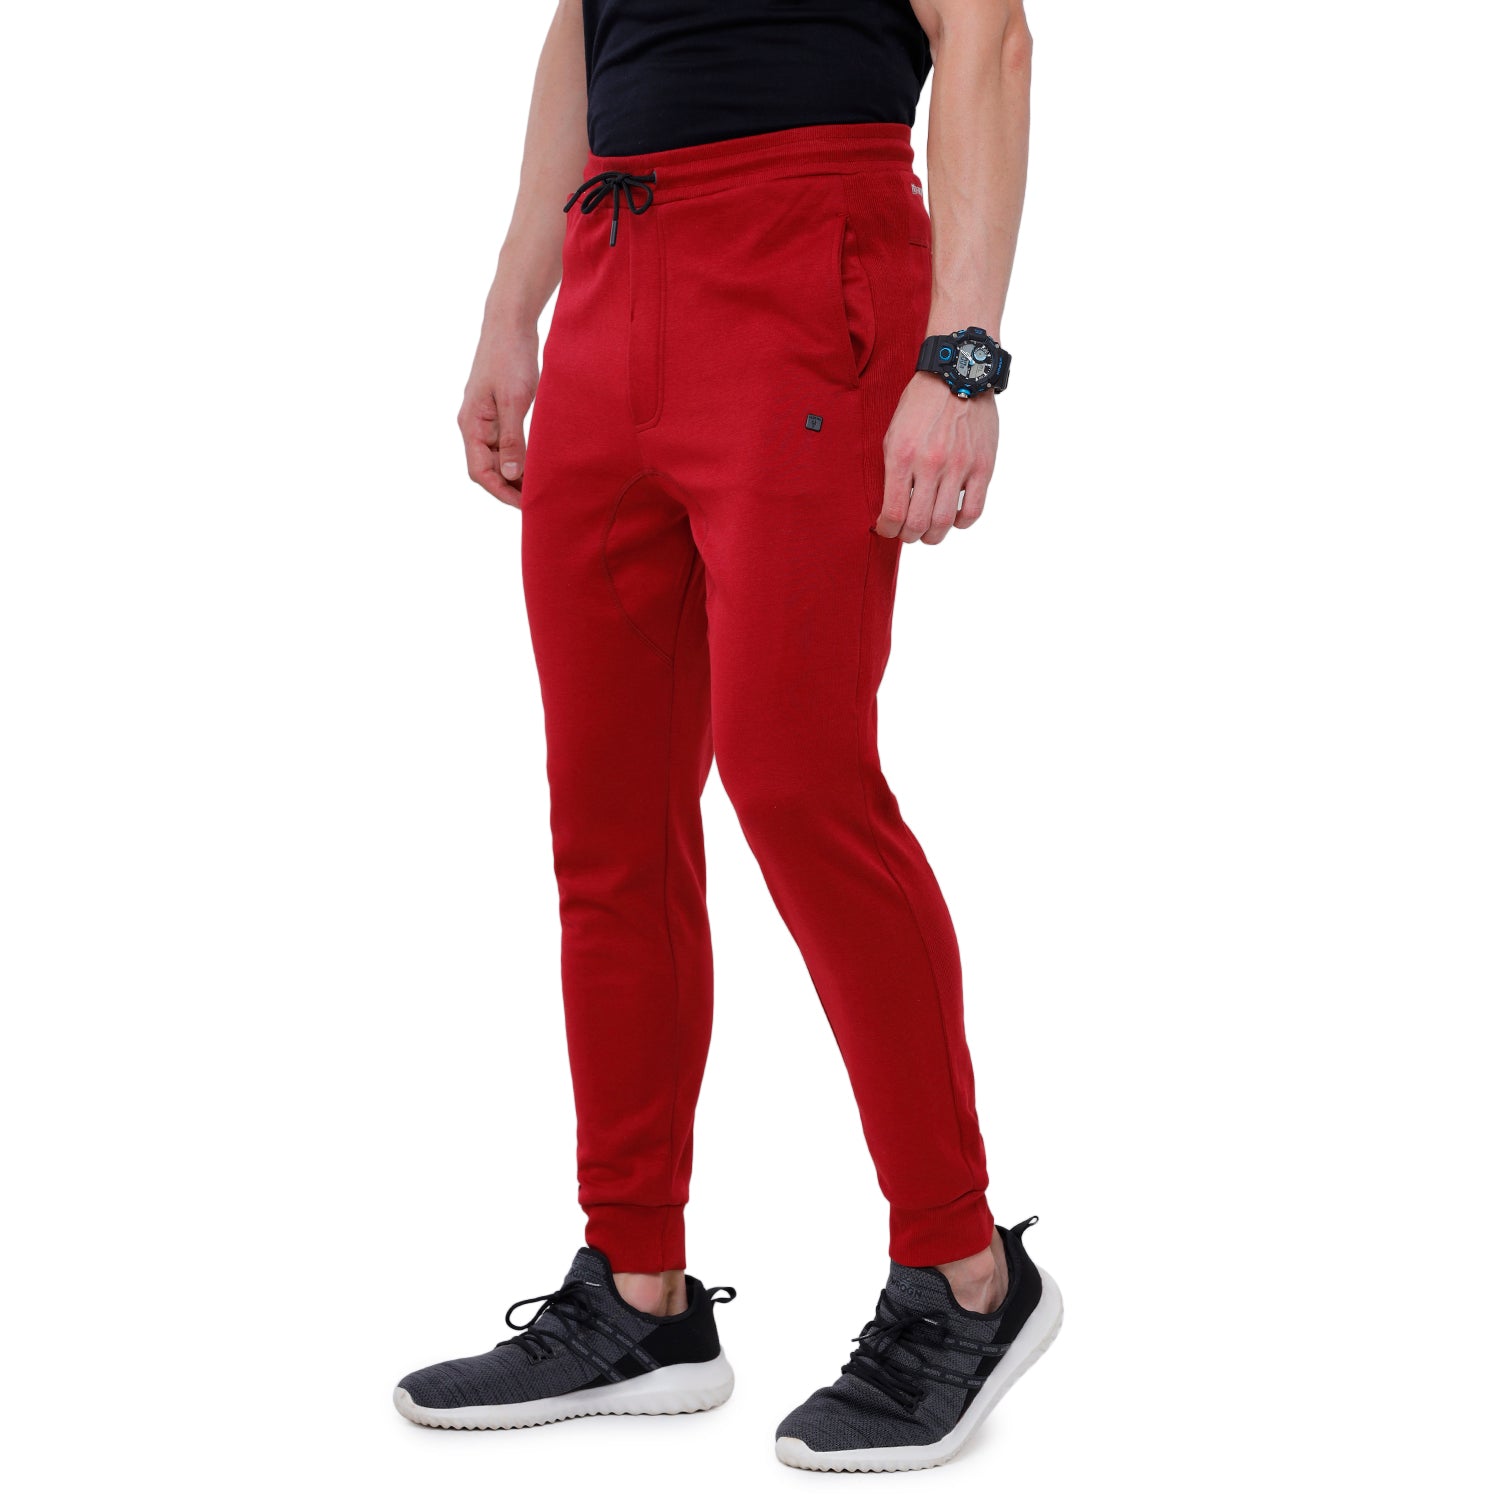 Classic Polo Men's Red Solid Mélange Slim Fit Stylish Jogger Pant - Gioz-03  A - Classic Polo